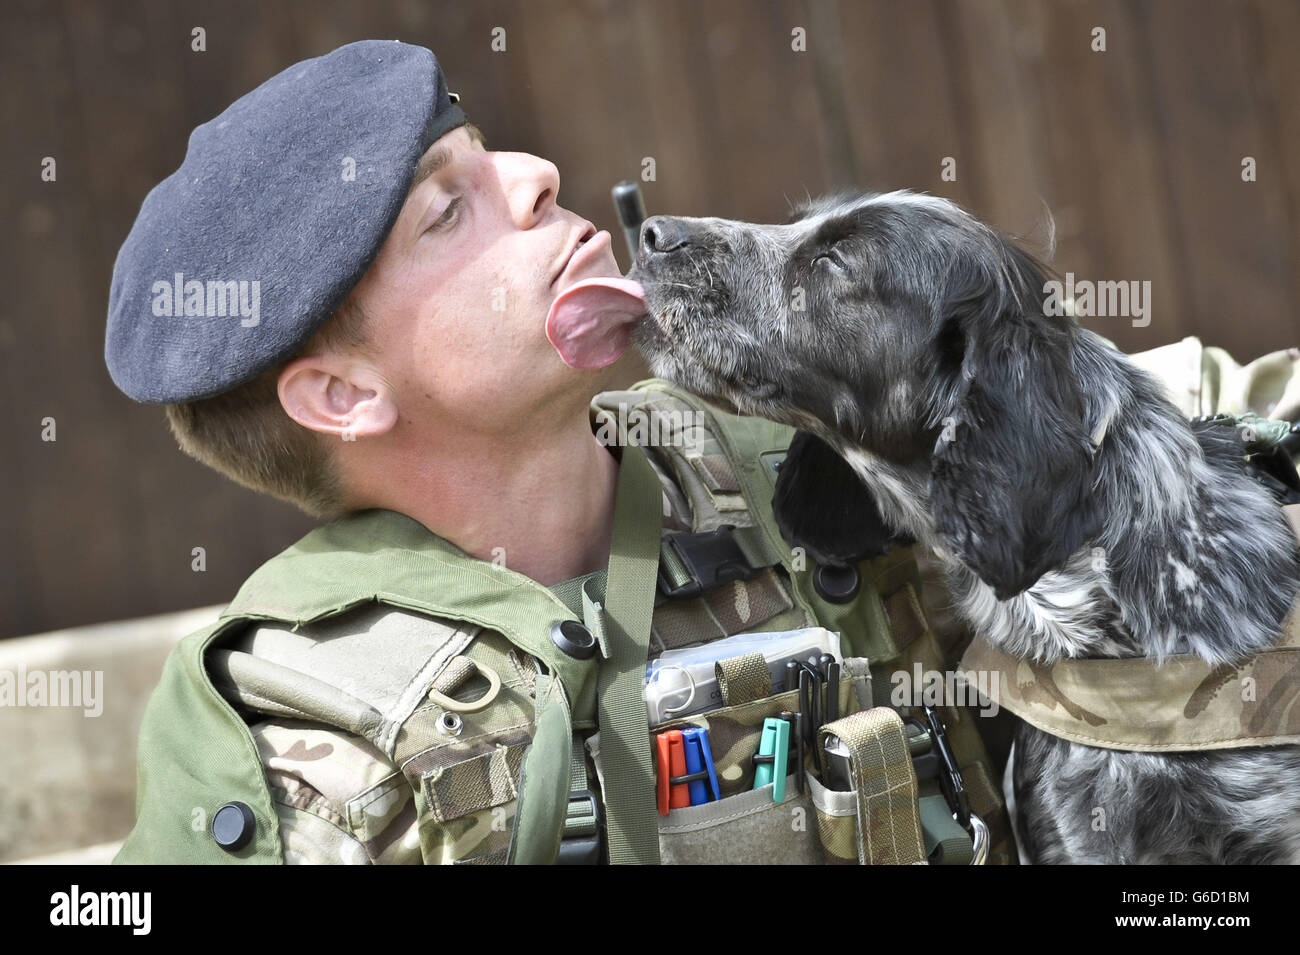 Military working dog Quin the seven-year-old cocker spaniel sneaks a cheeky kiss from his handler Lance Corporal Stu Downer, 1 Military Working Dogs, 30, from Kent as he takes a break from training on Salisbury Plain as 7th Armoured Brigade prepare to deploy to Afghanistan on Operation Herrick 19. Stock Photo